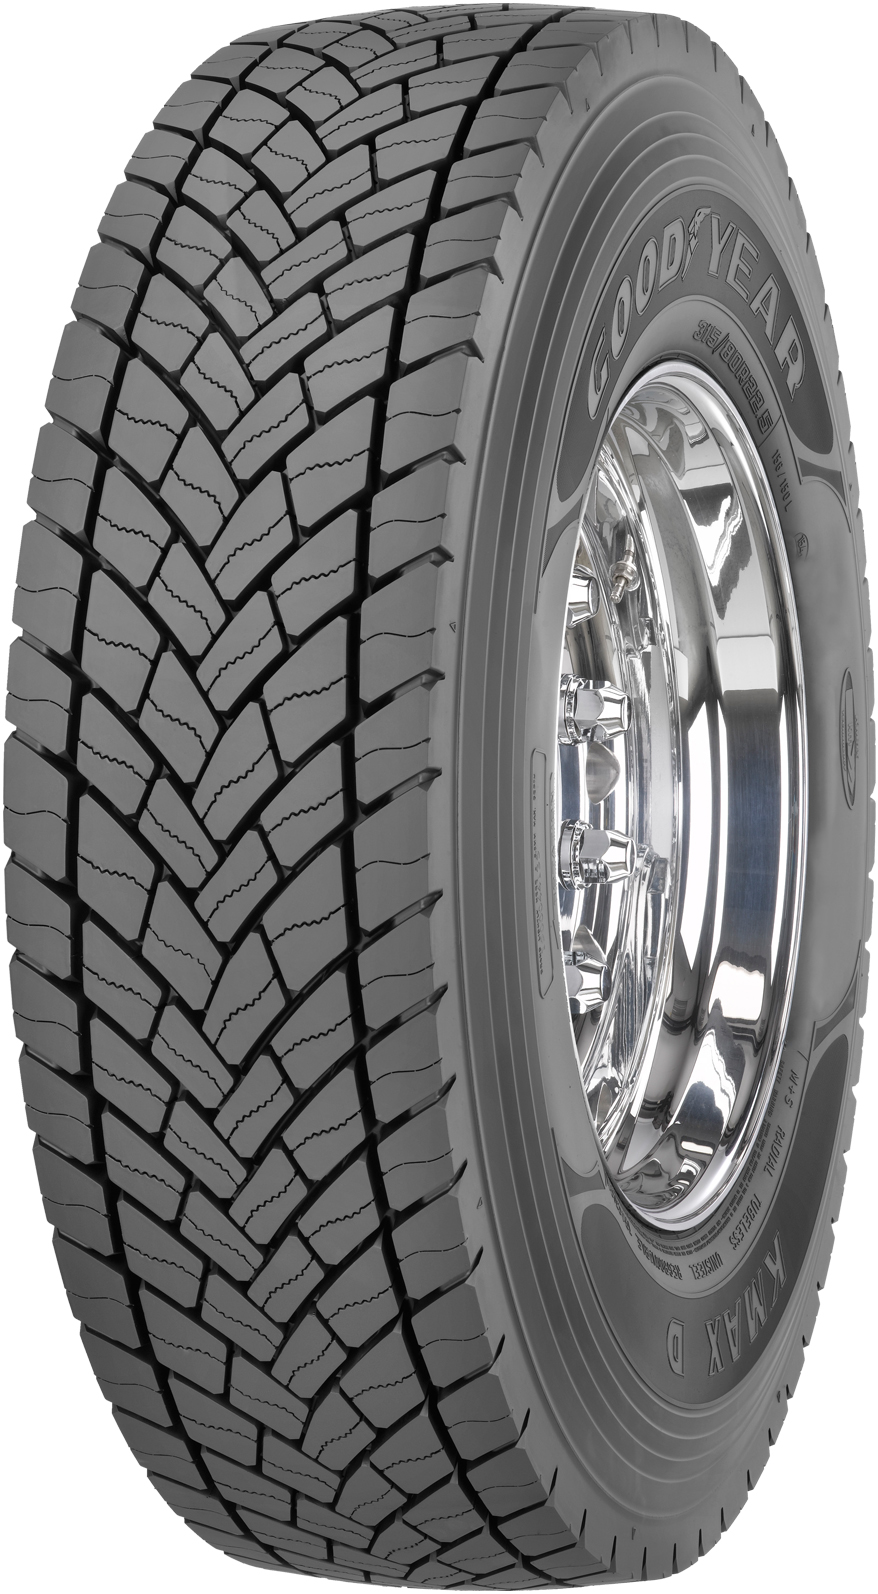 product_type-heavy_tires GOODYEAR KMAX D 14 TL 235/75 R17.5 132M